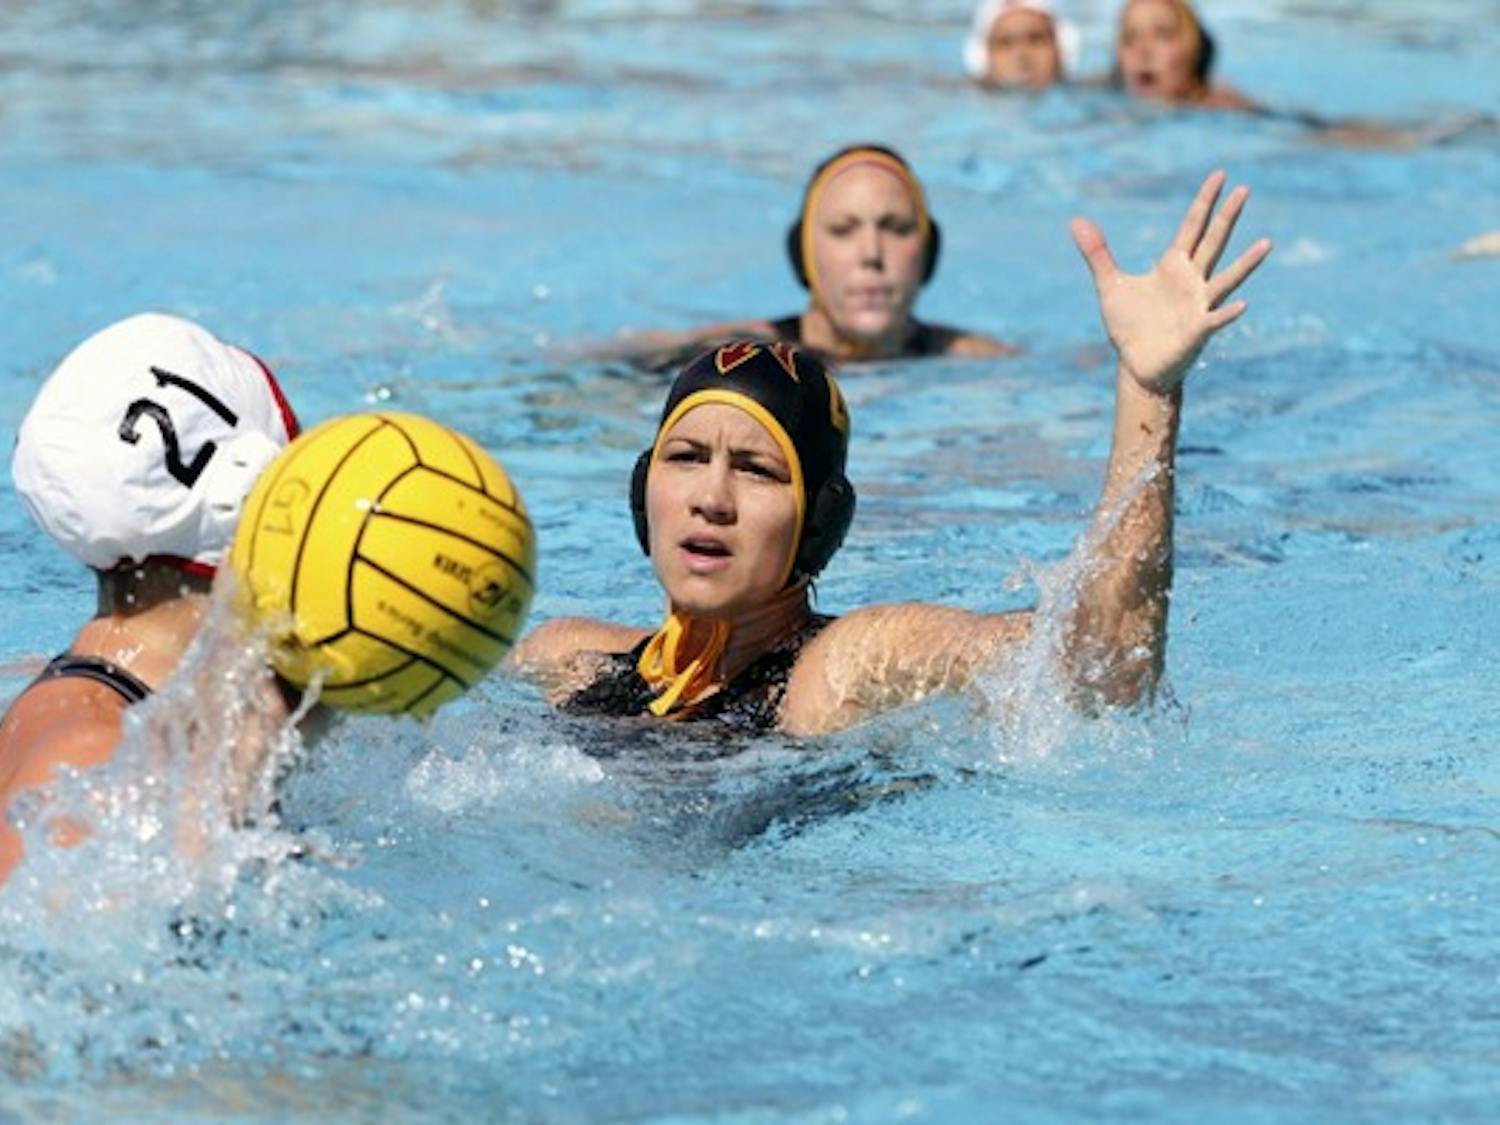 Anna Kertes defends a pass in a game against San Diego State on March 3. After winning their past two games at home, the Sun Devils travel to California to take on five teams in four days next week. (Photo by Sam Rosenbaum)